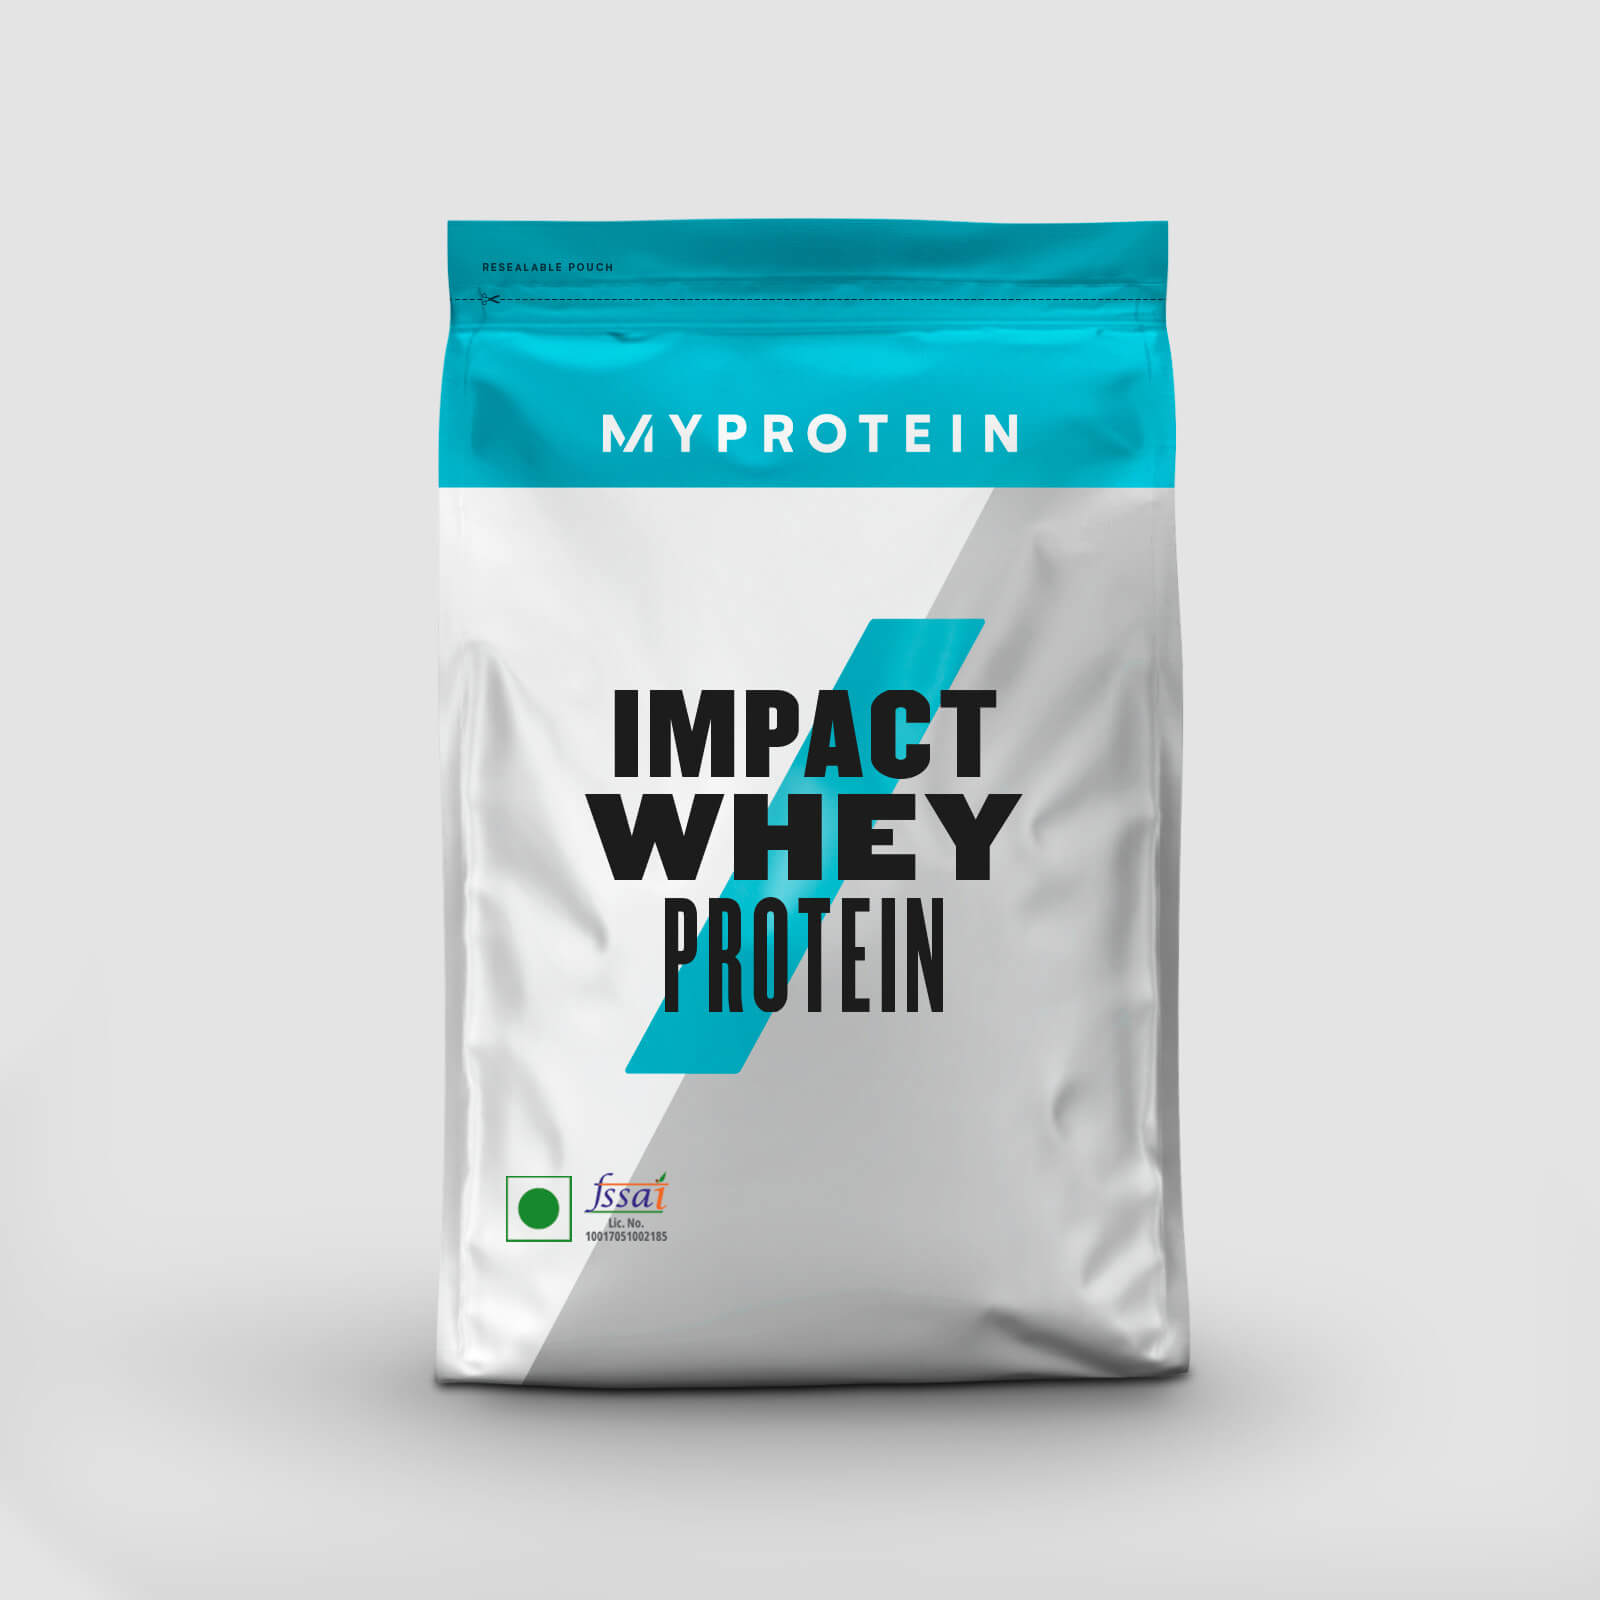 Impact Whey Protein - 250g - Rocky Road